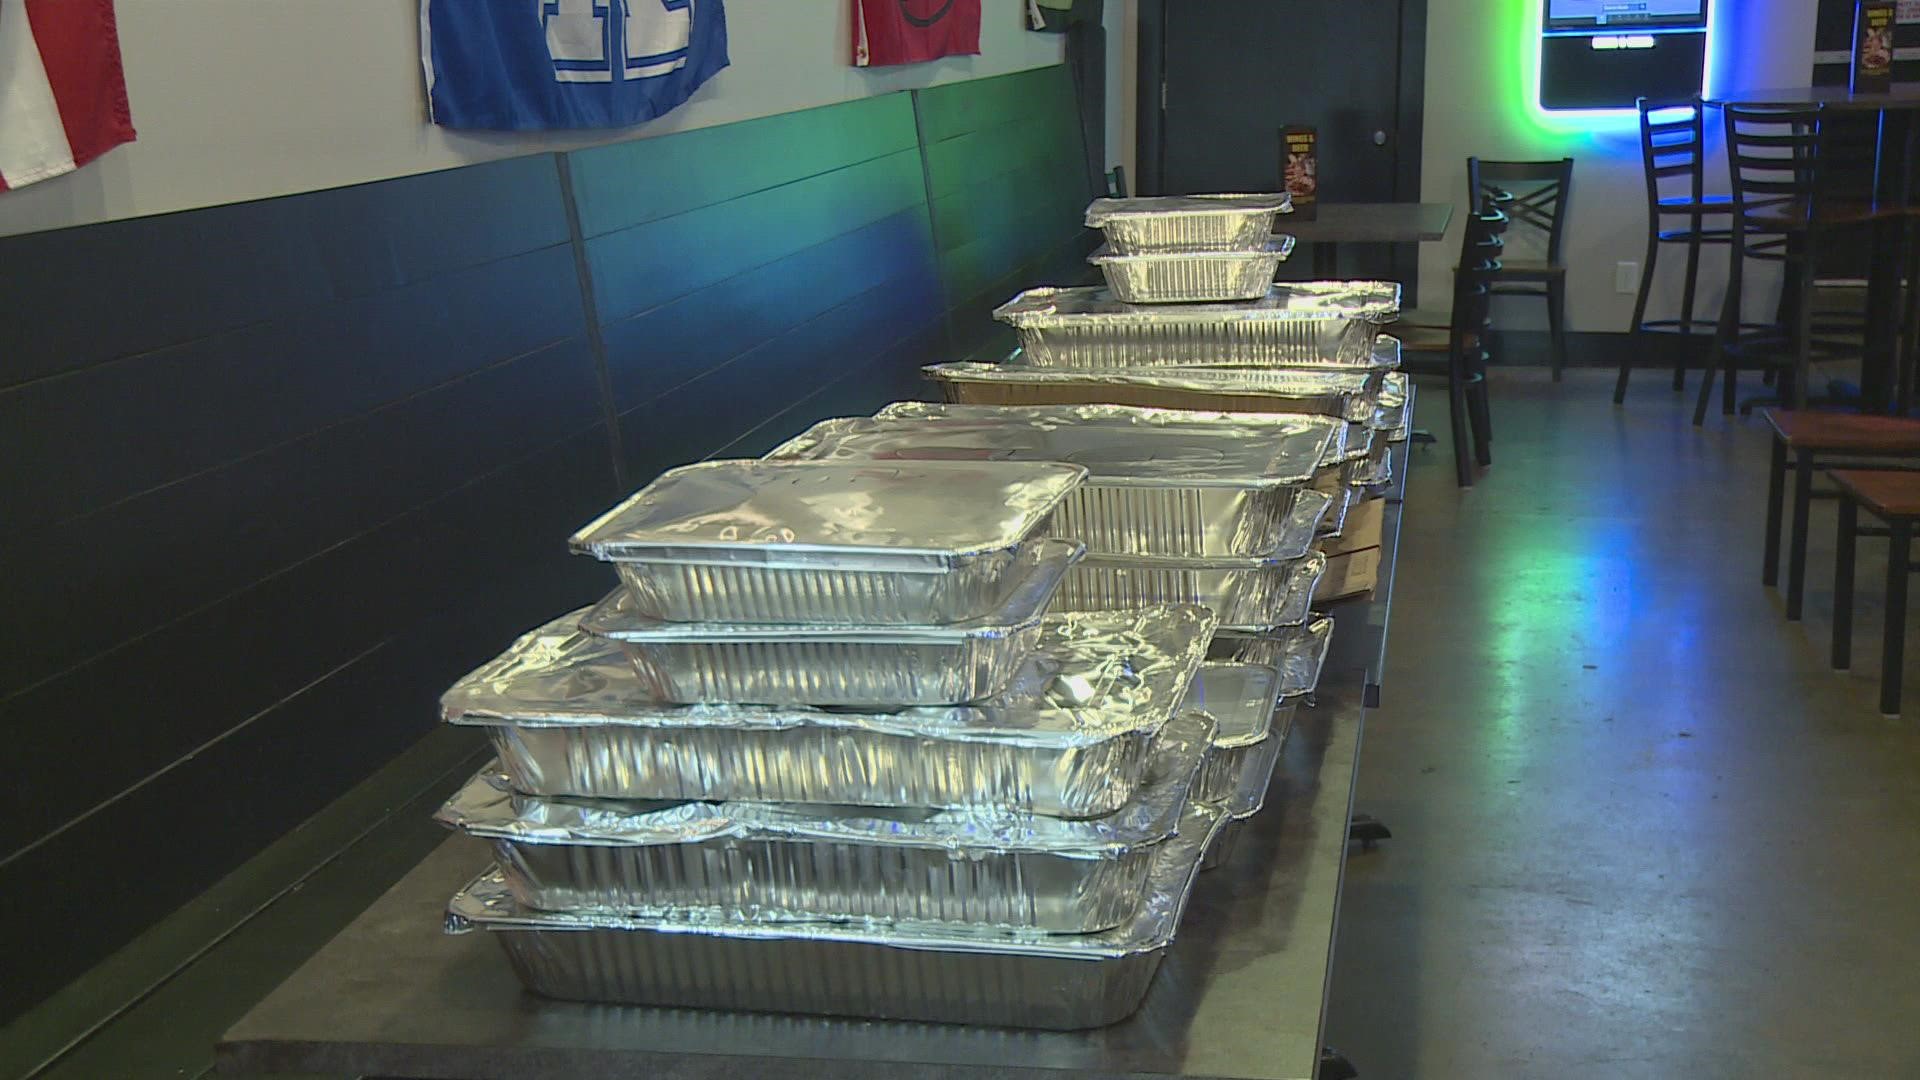 Harry's Taphouse & Kitchen have been cooking Thanksgiving meals for hundreds of people over the last two years, and they got a head start on this year's dinner.